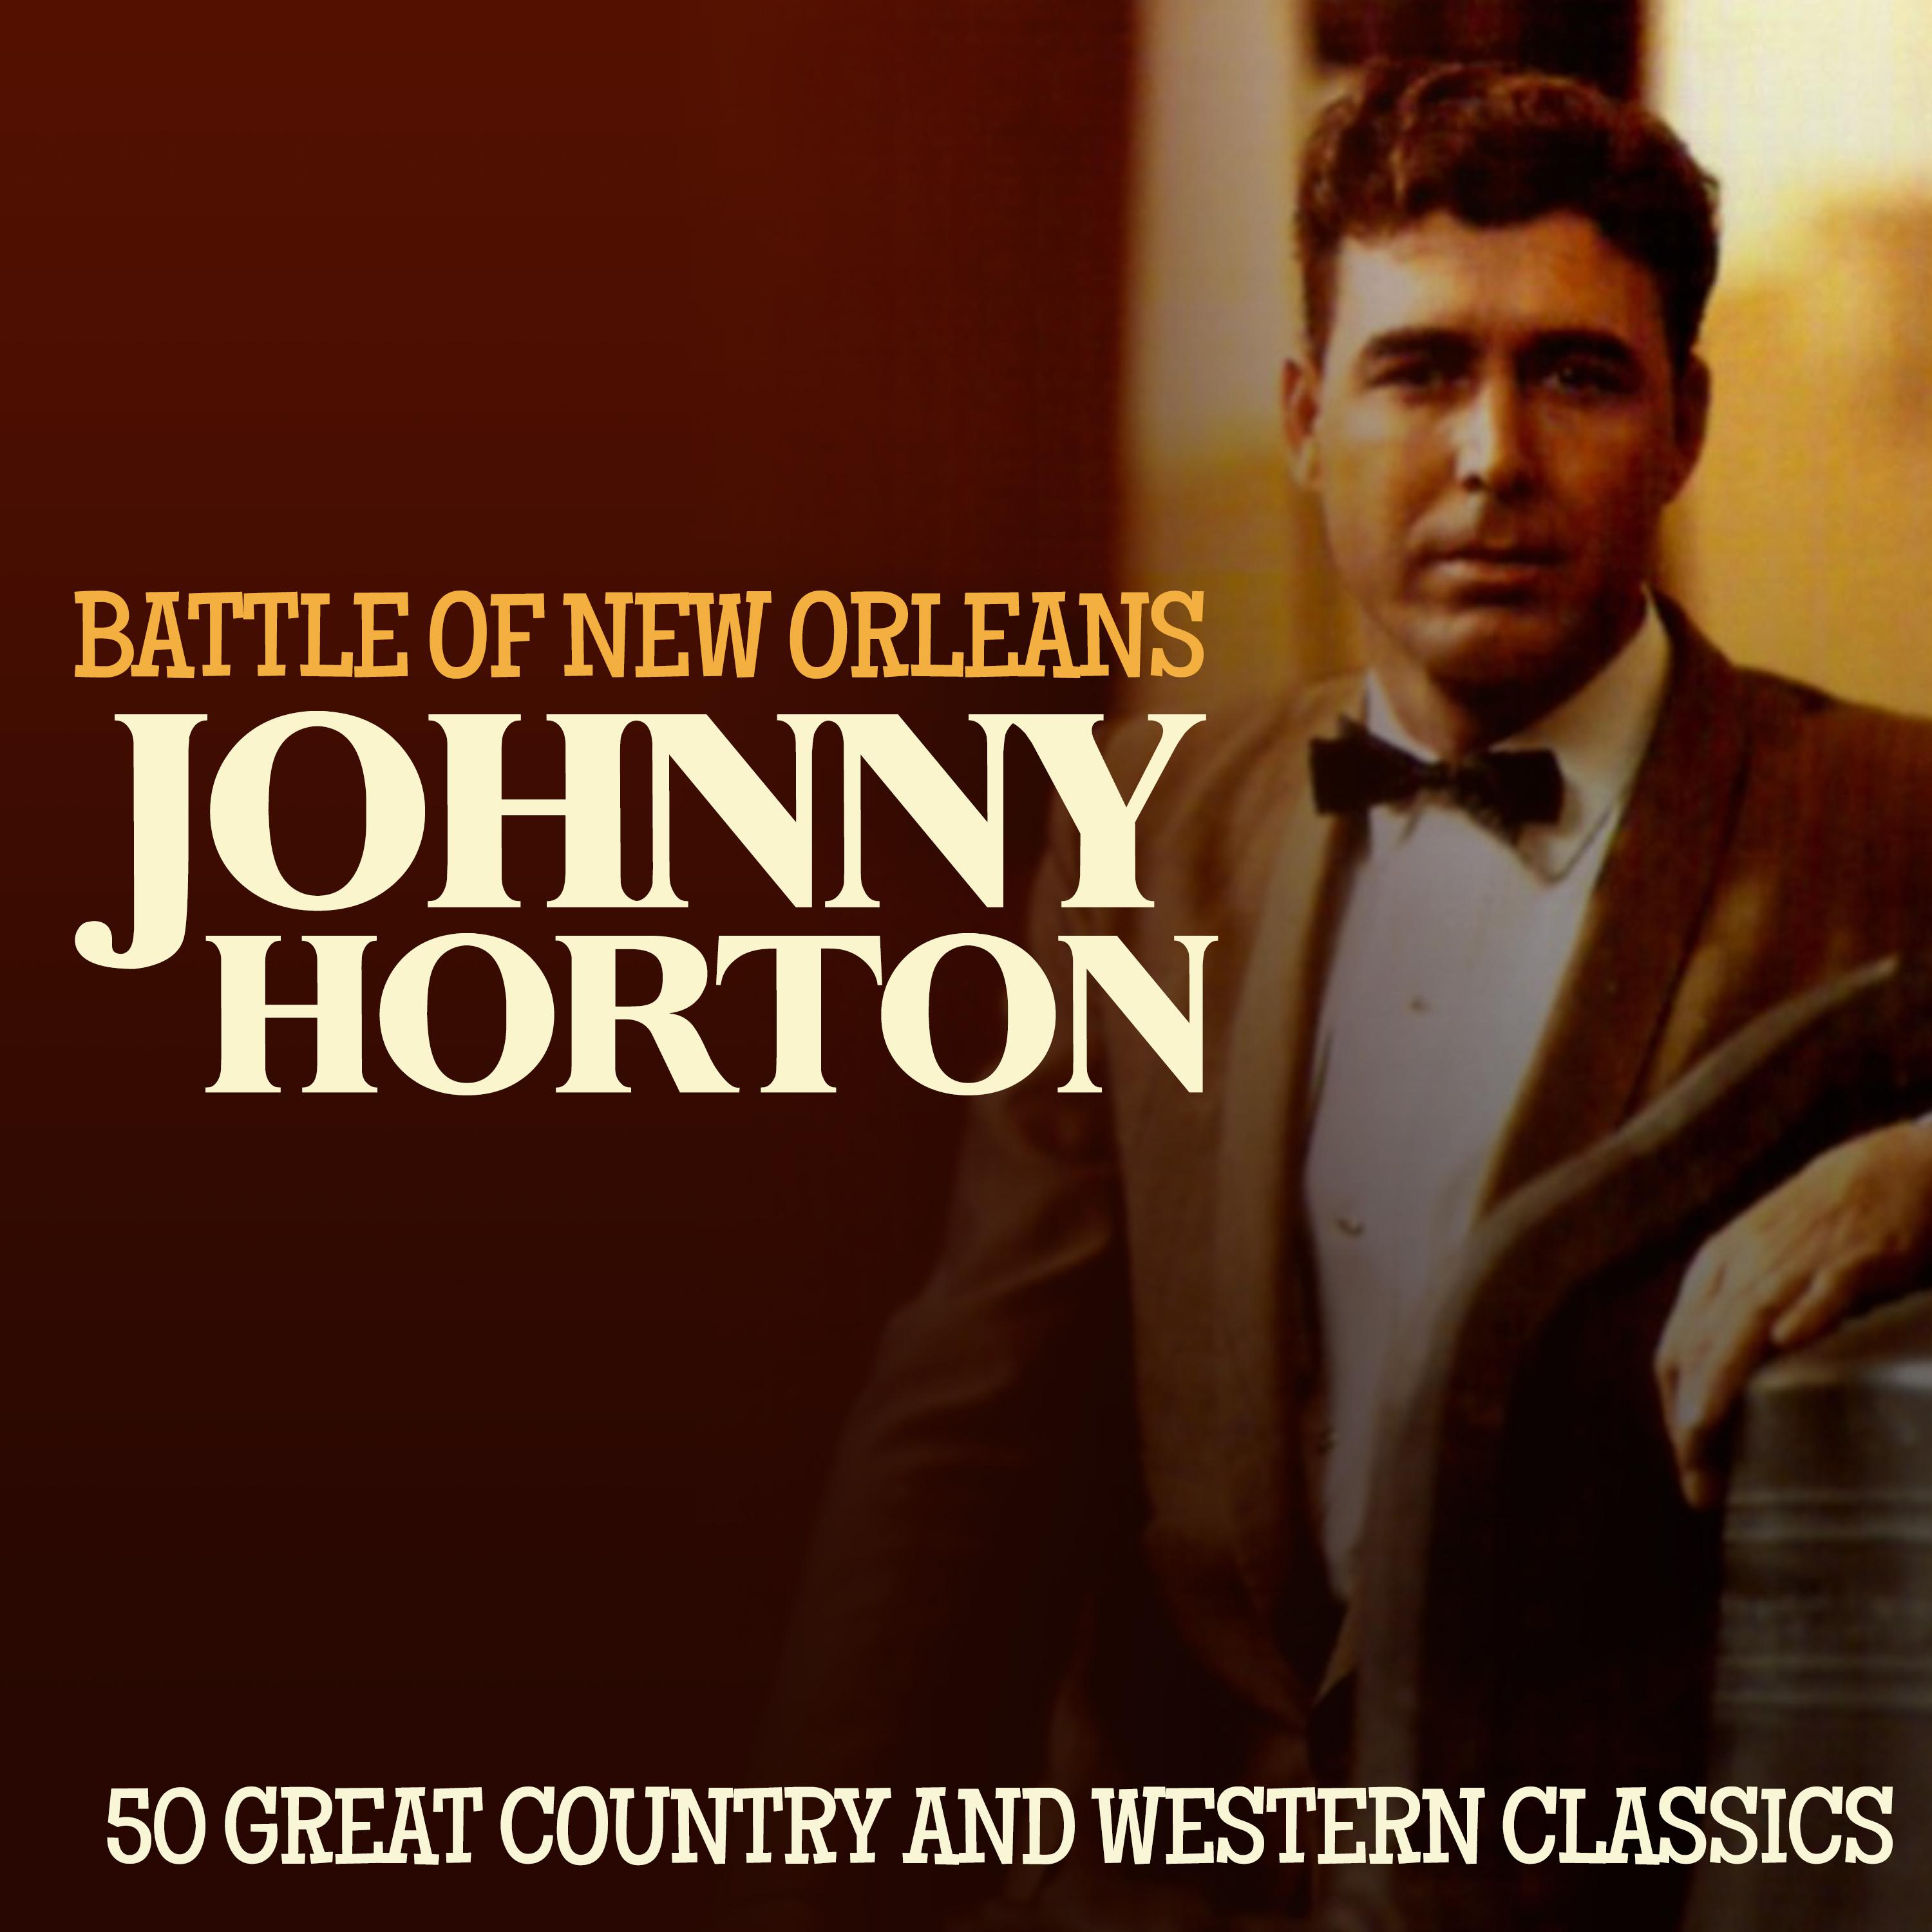 Battle of New Orleans - 50 Country & Western Classics